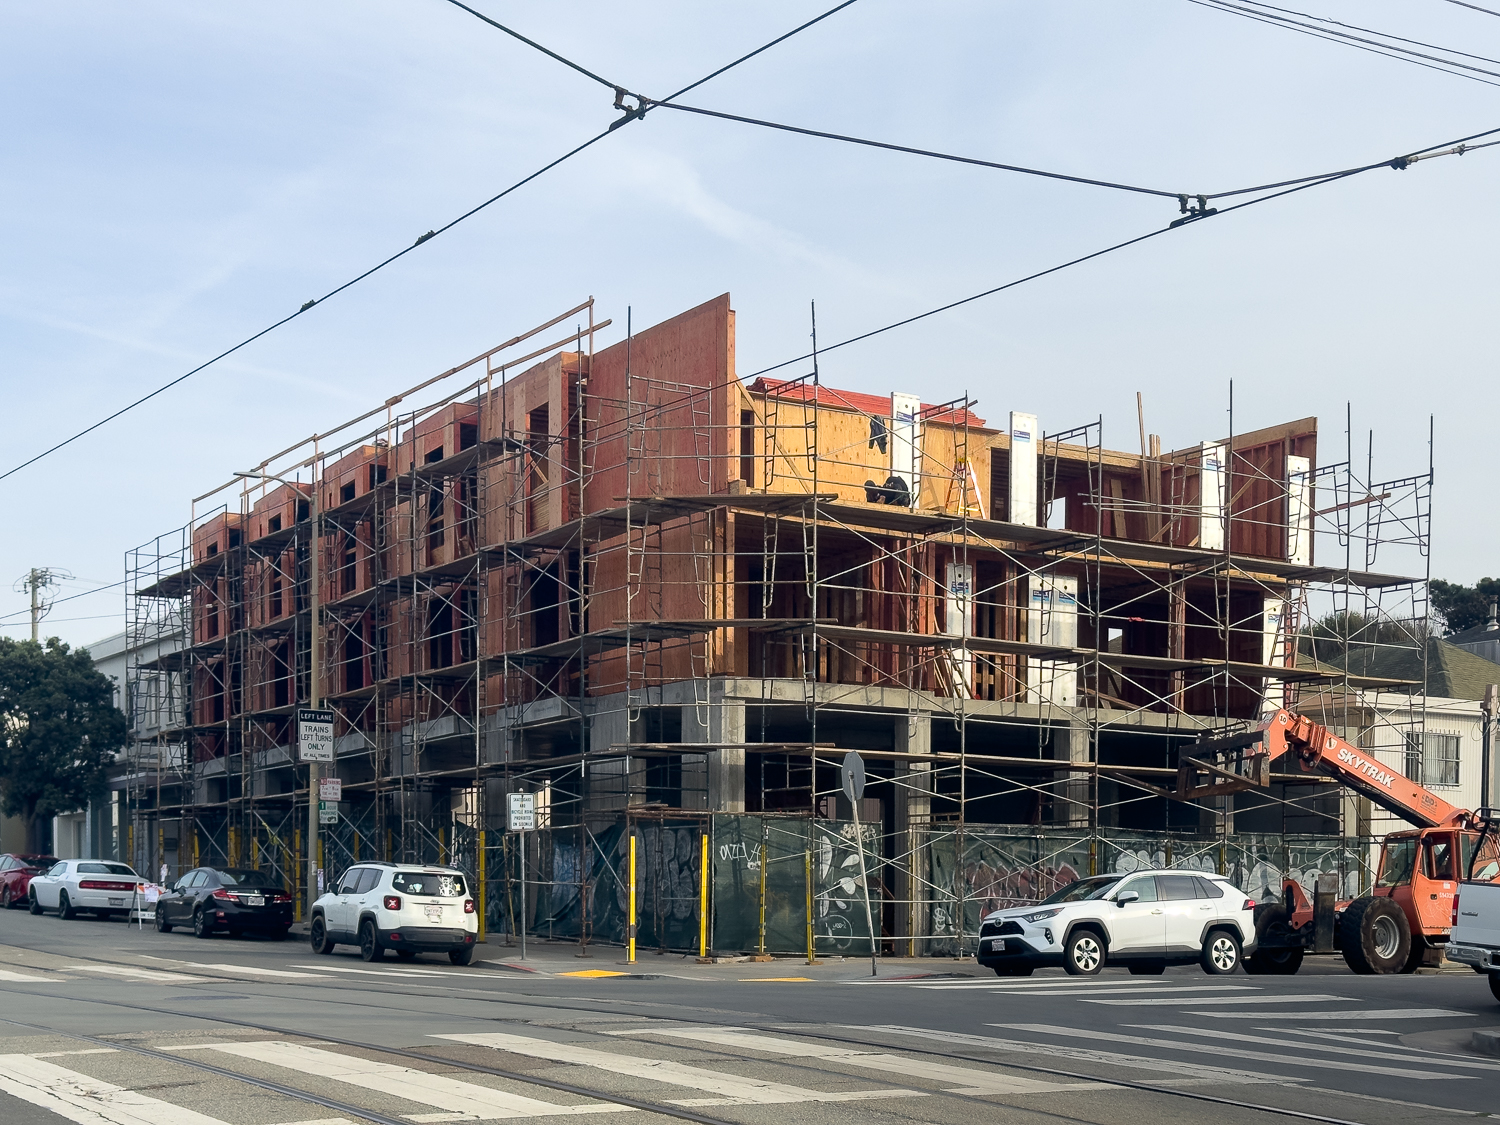 3945 Judah Street construction update, image by author